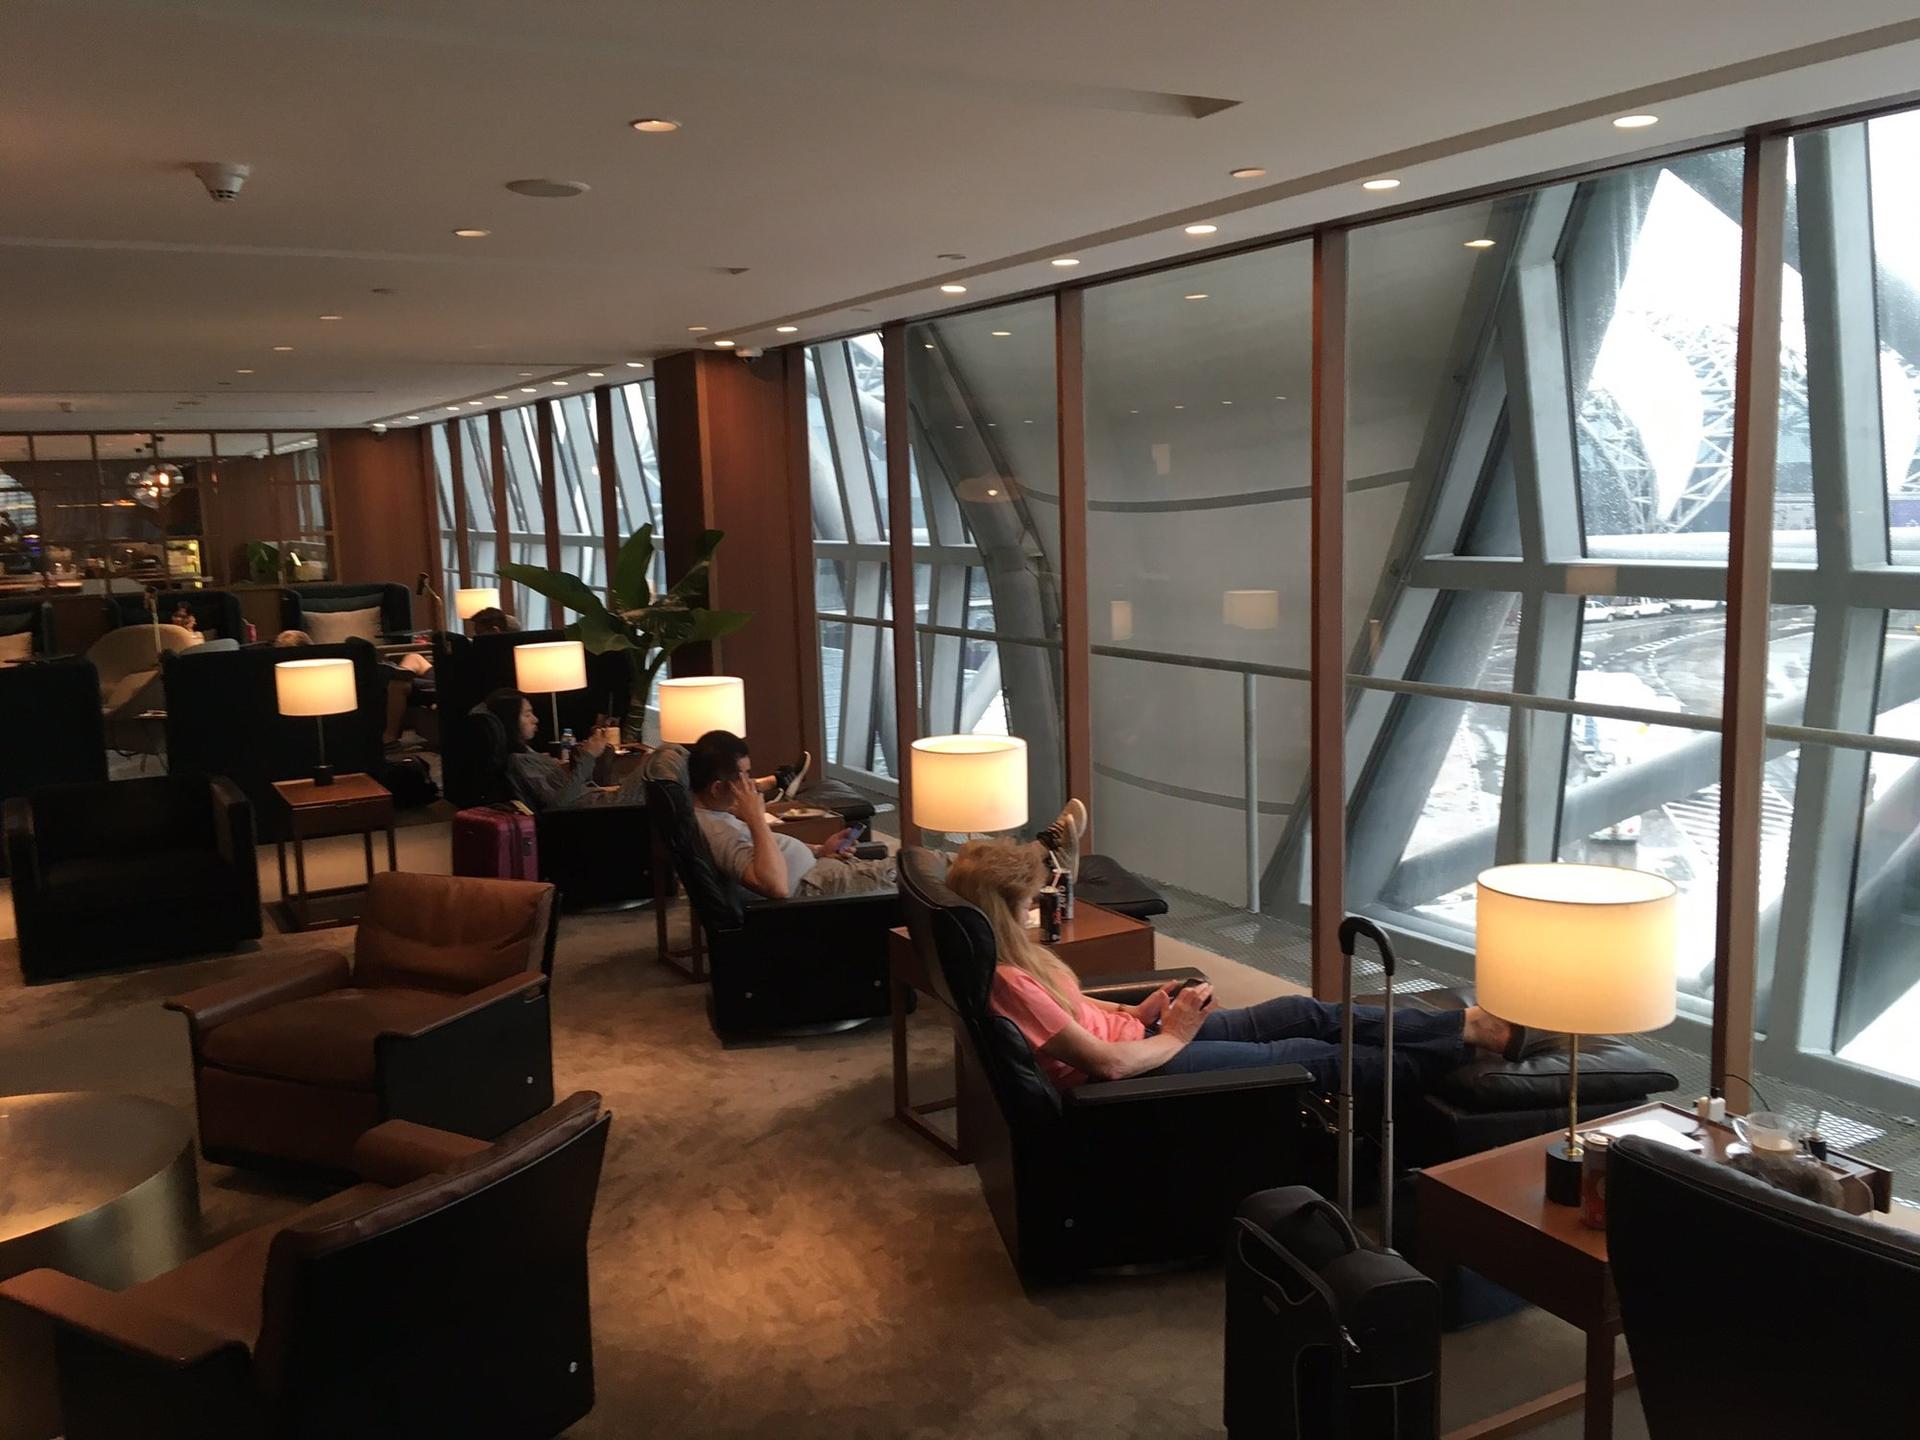 Cathay Pacific First and Business Class Lounge image 65 of 69